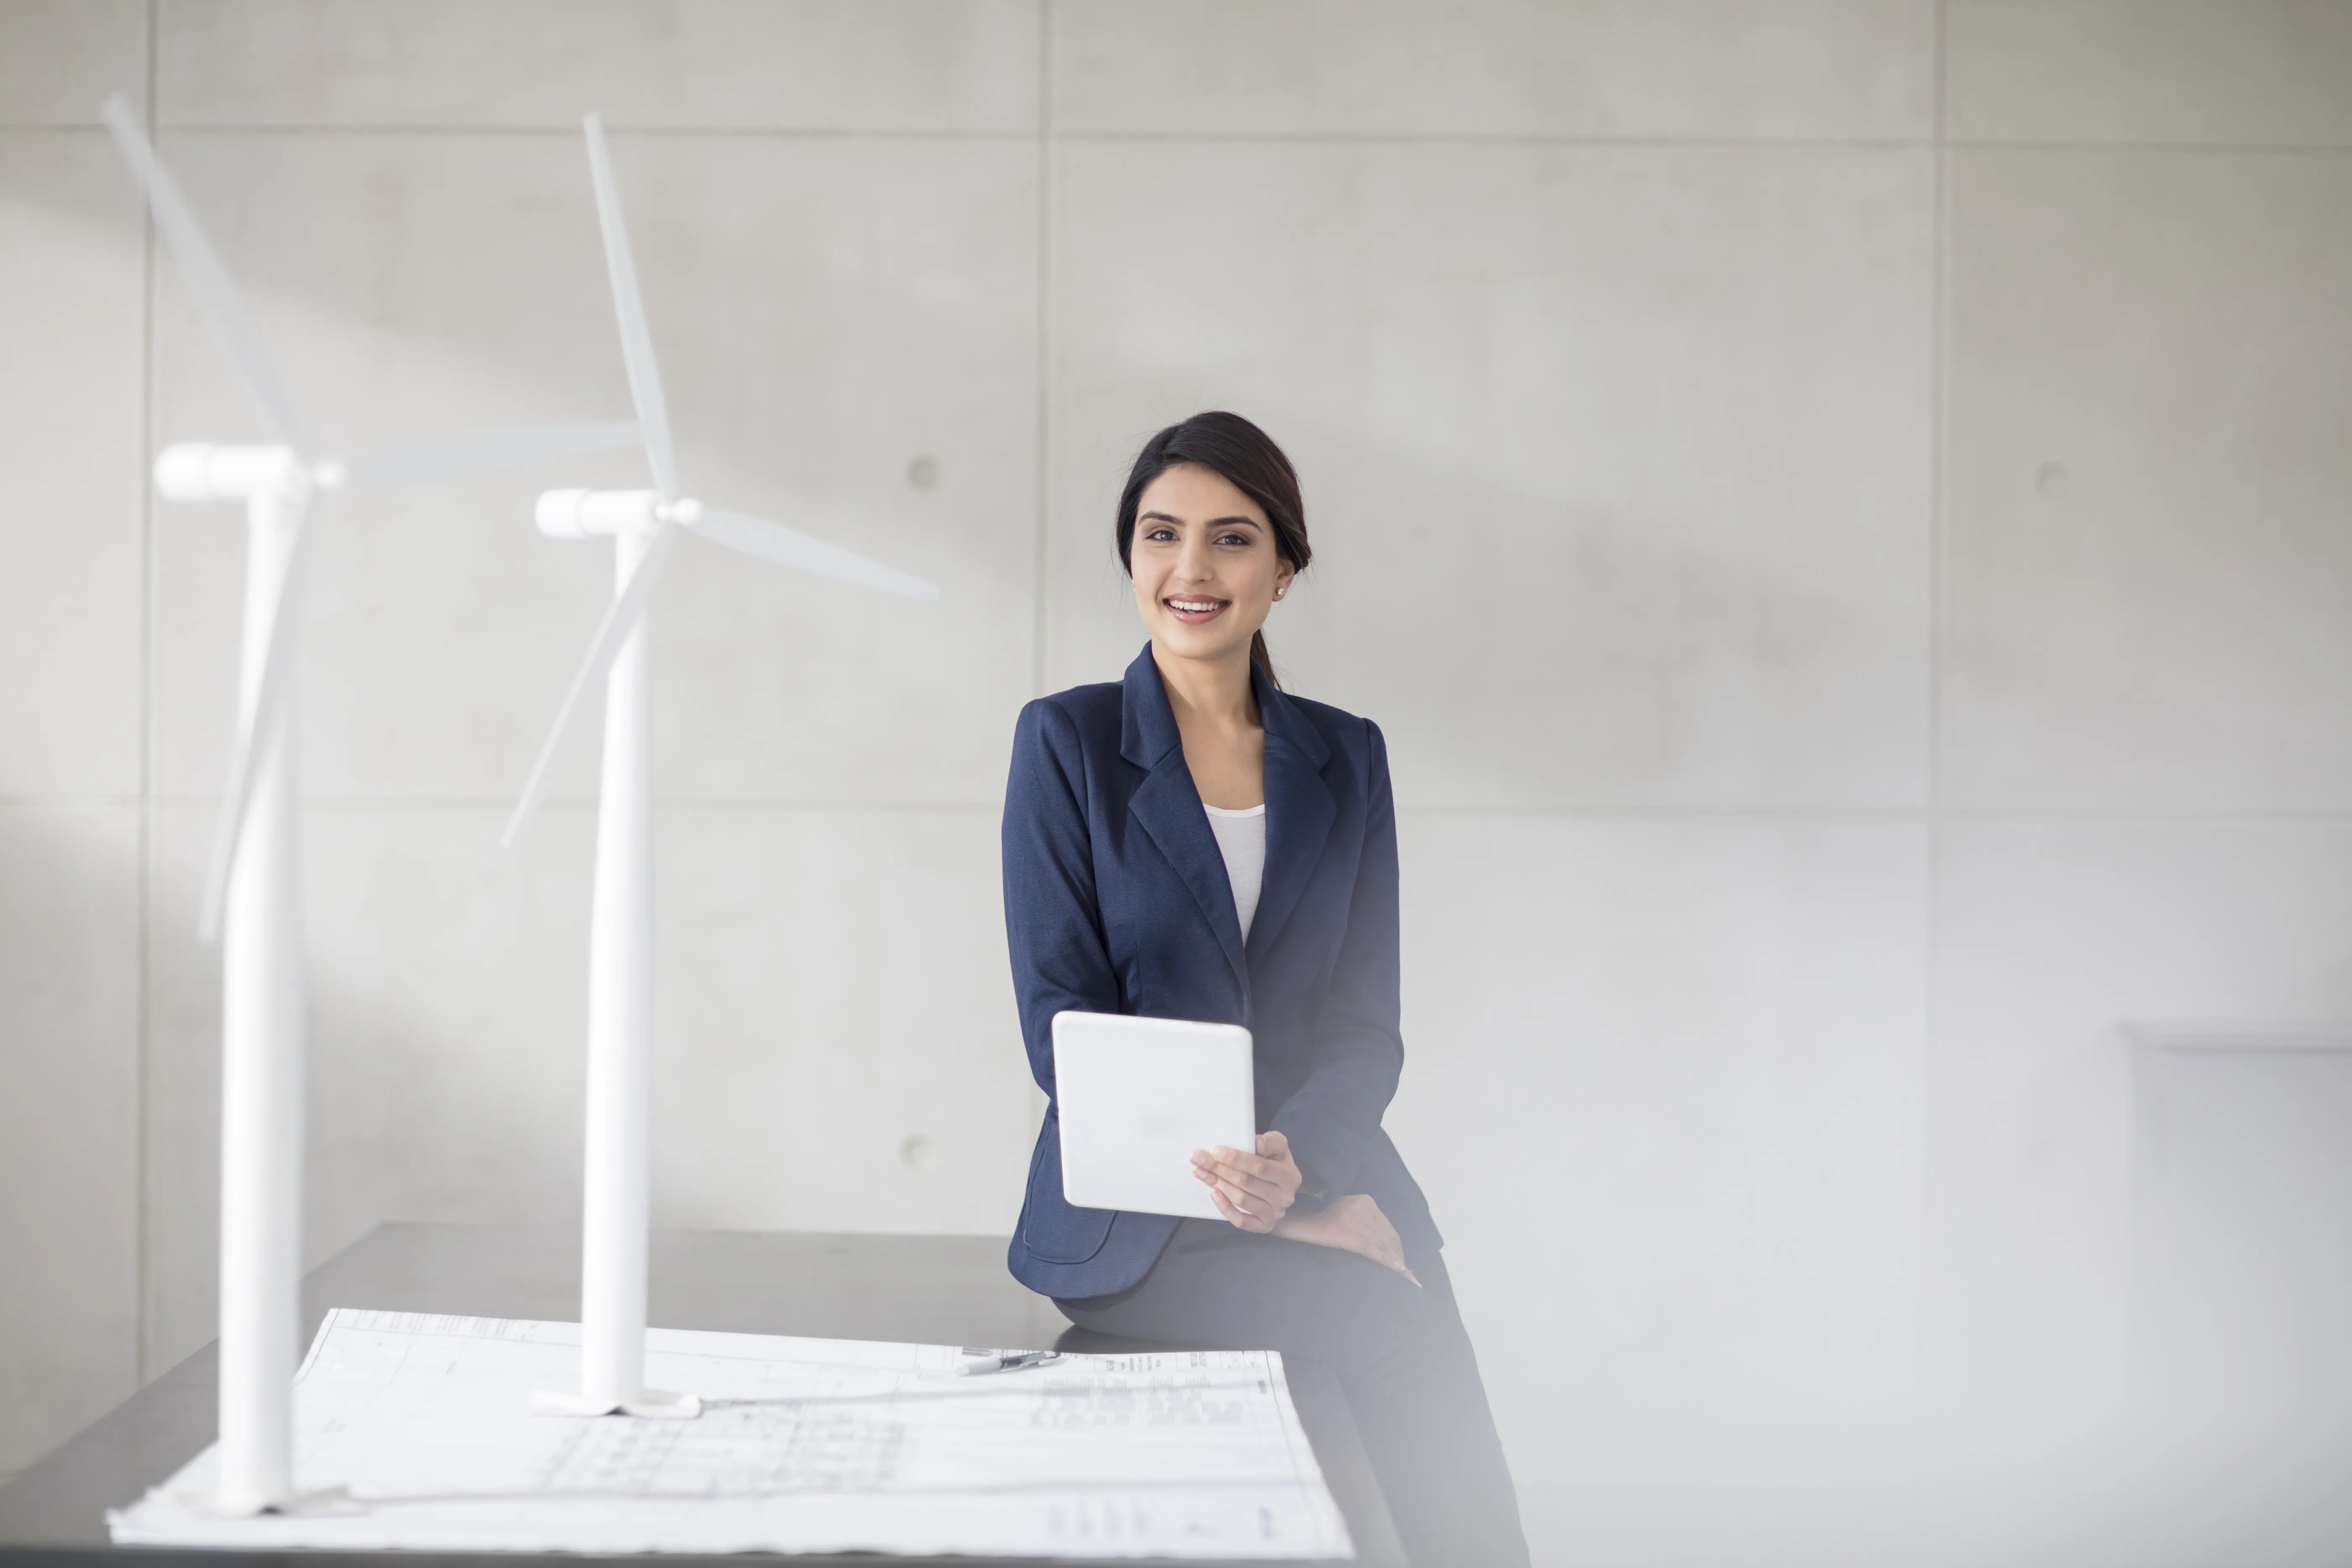 Empower women to achieve just energy transition